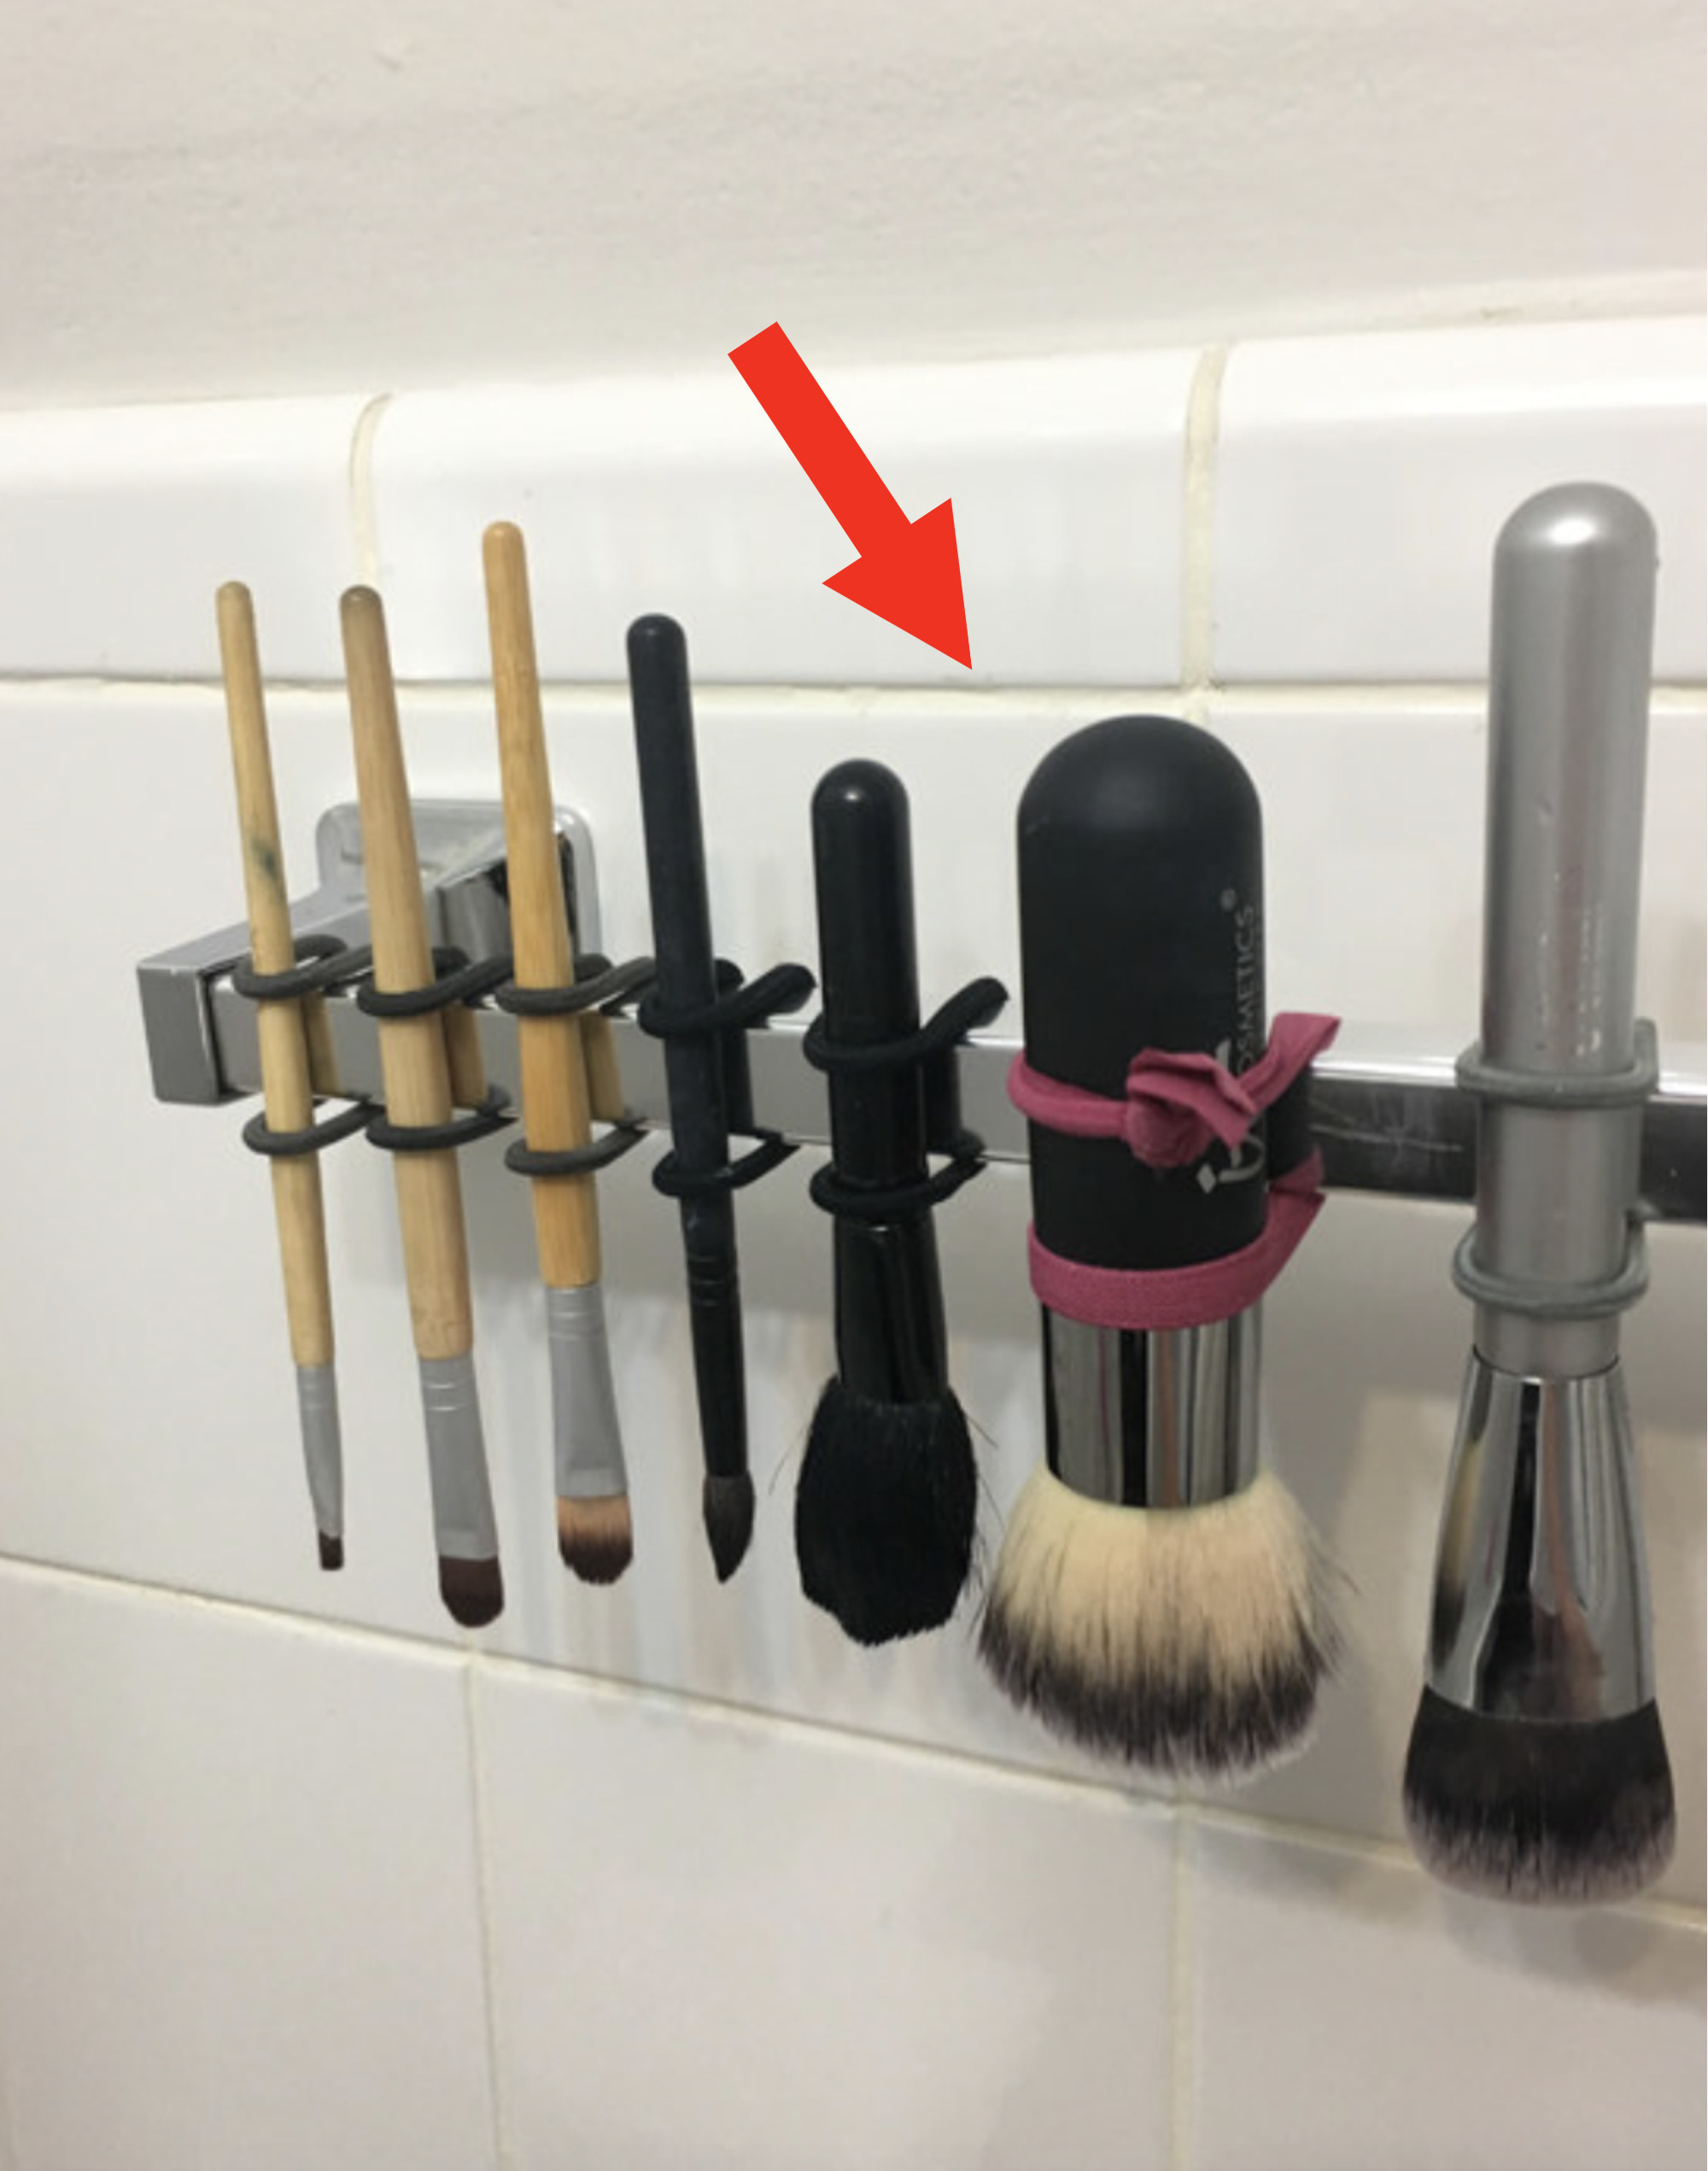 Makeup brushes being hung upside down to dry